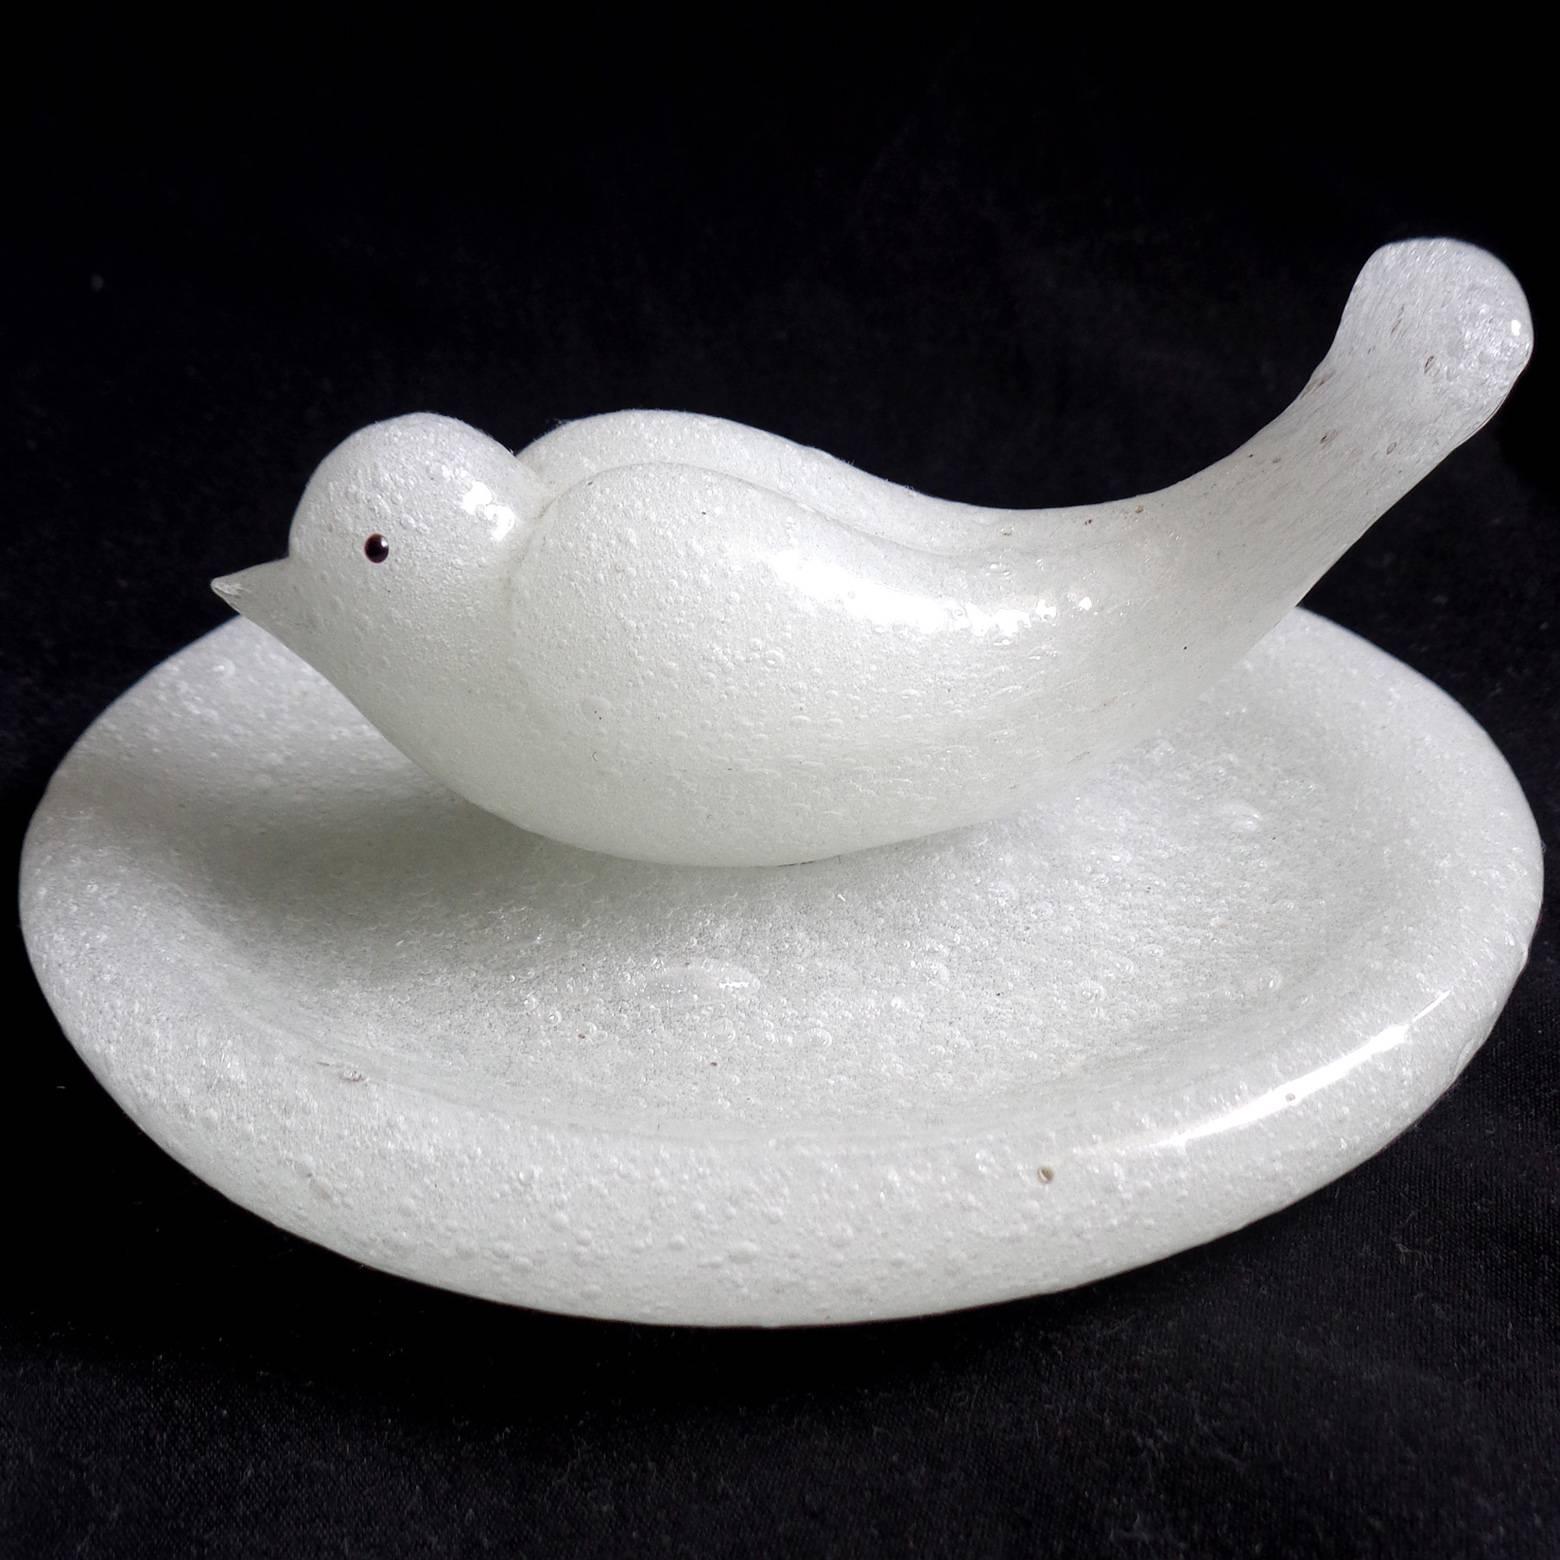 Rare and beautiful antique Murano hand blown white Pulegoso art glass bird trinket / ring dish. Documented to designer Flavio Poli for Seguso Vetri D' Arte, circa 1937. It is published (as seen on the last photo), model number 3903. Collectors item.